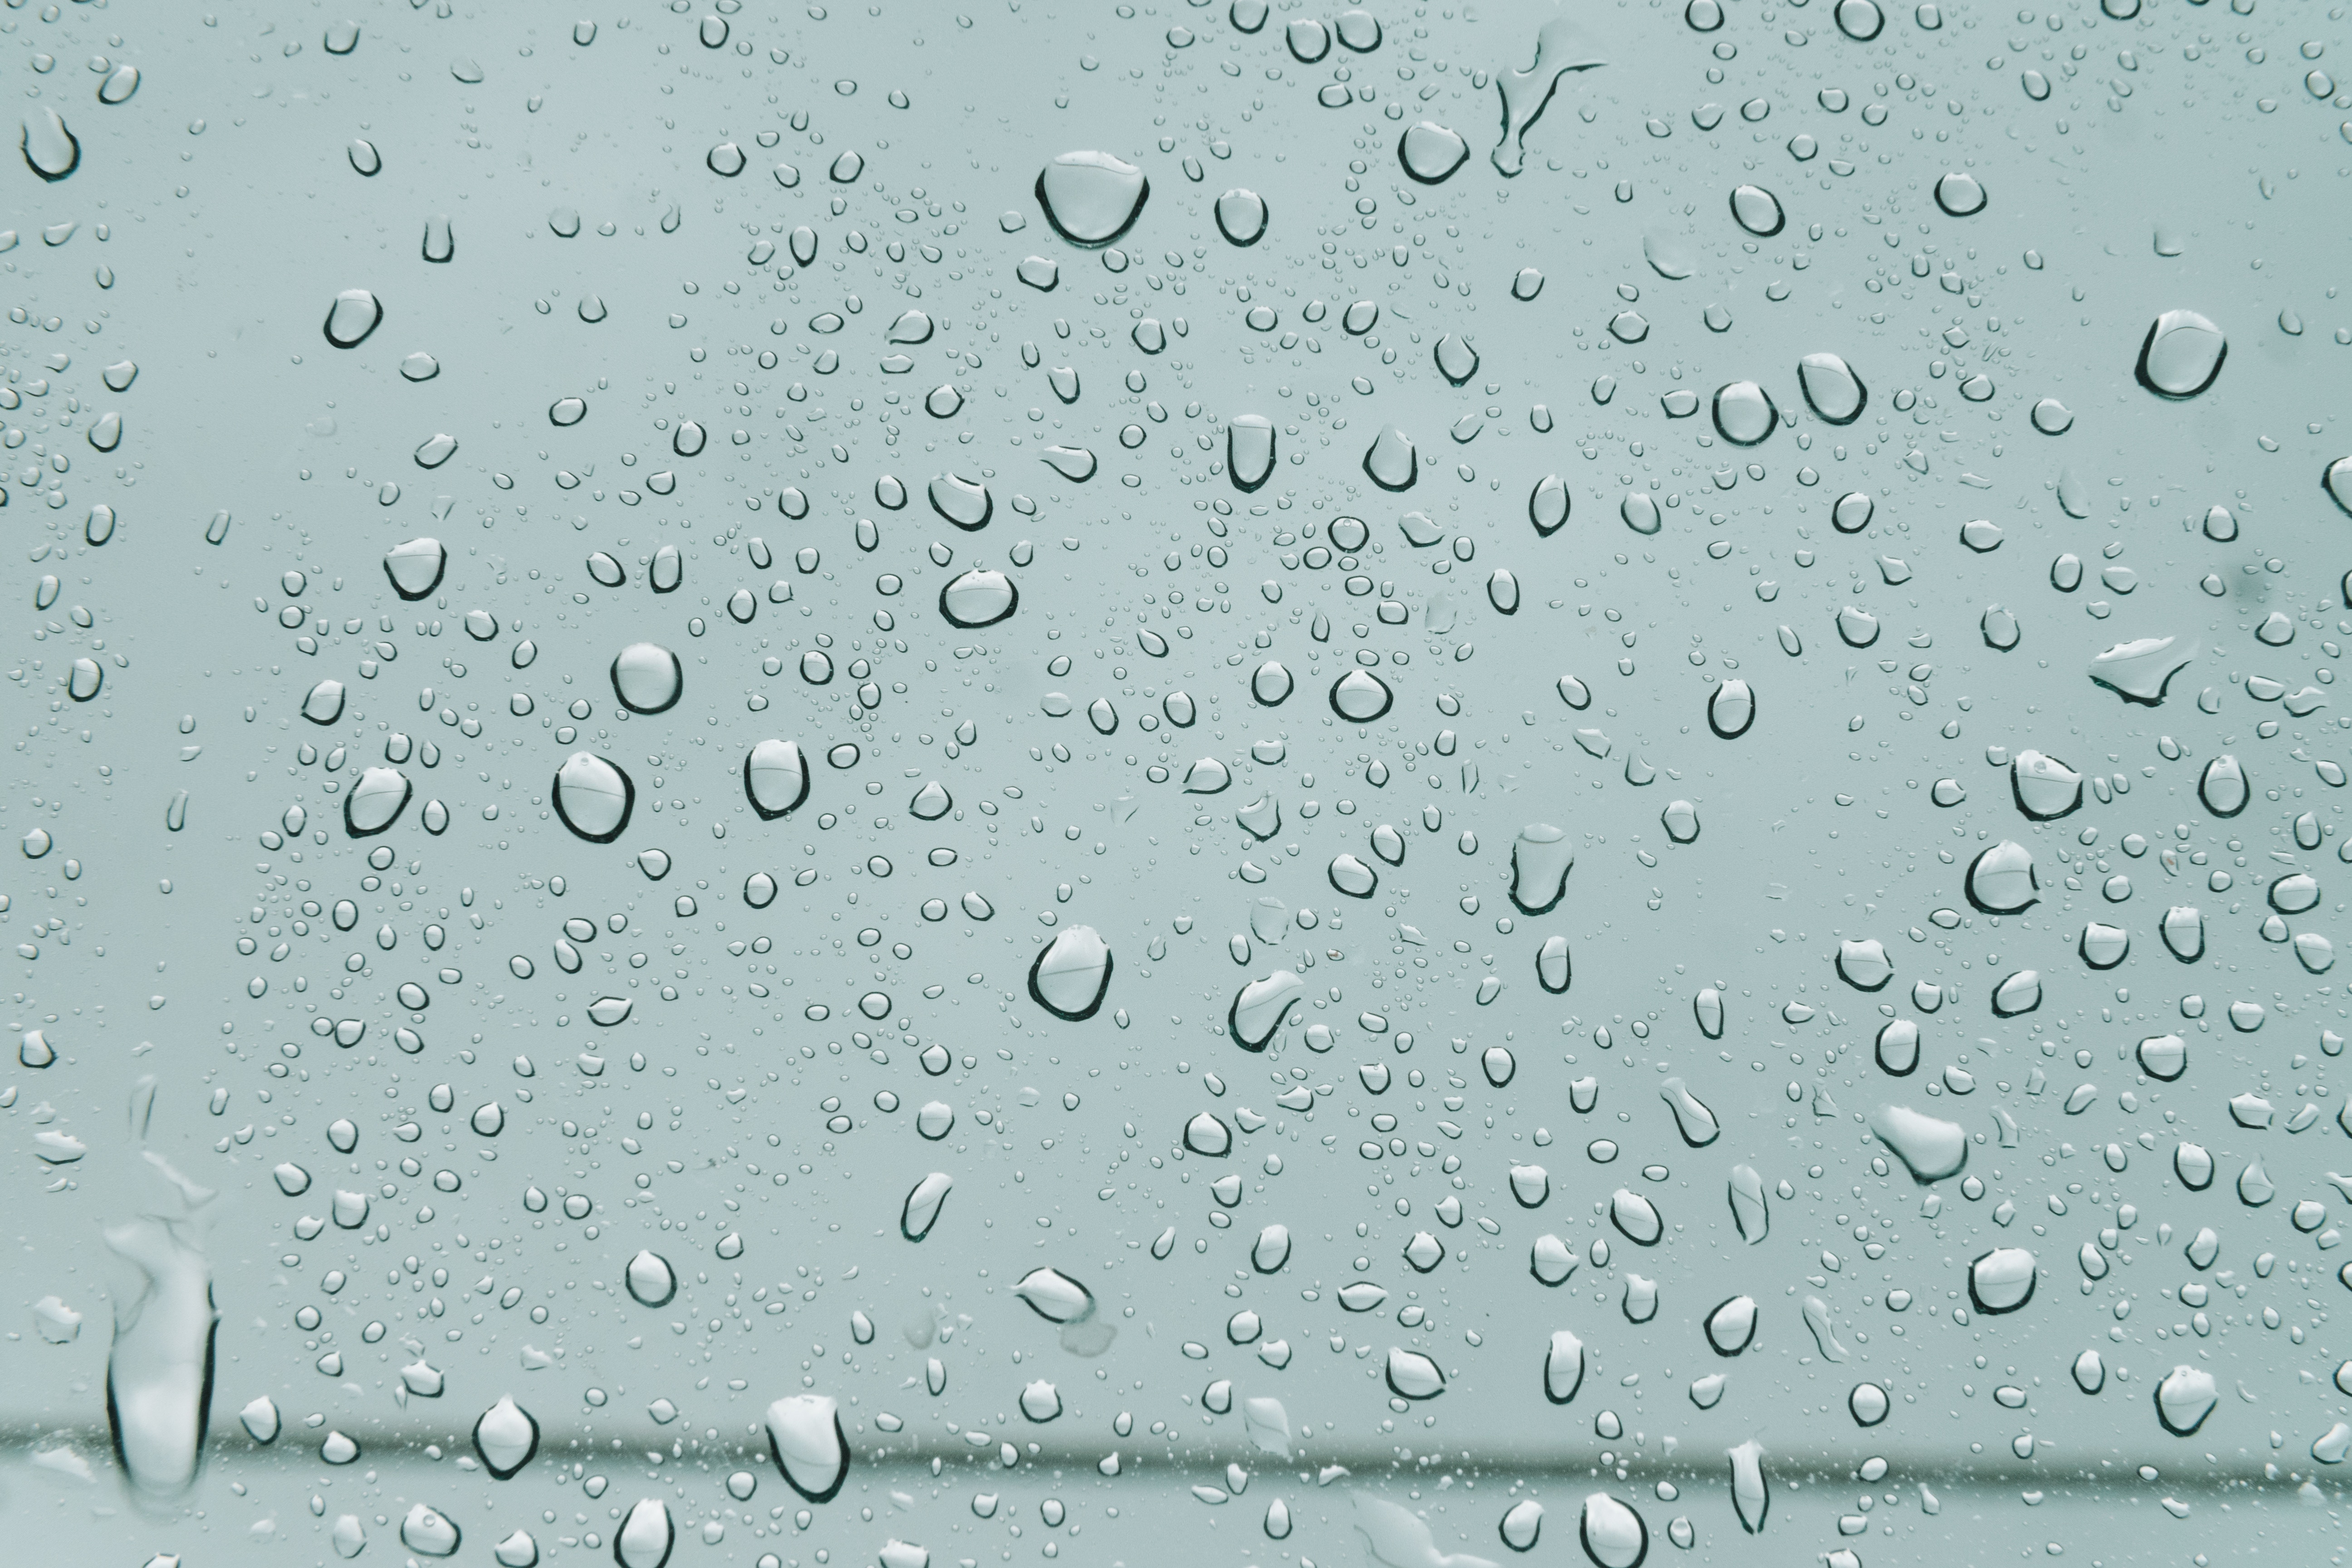 surface, form, forms, rain, drops, macro, wet, moisture, humid High Definition image